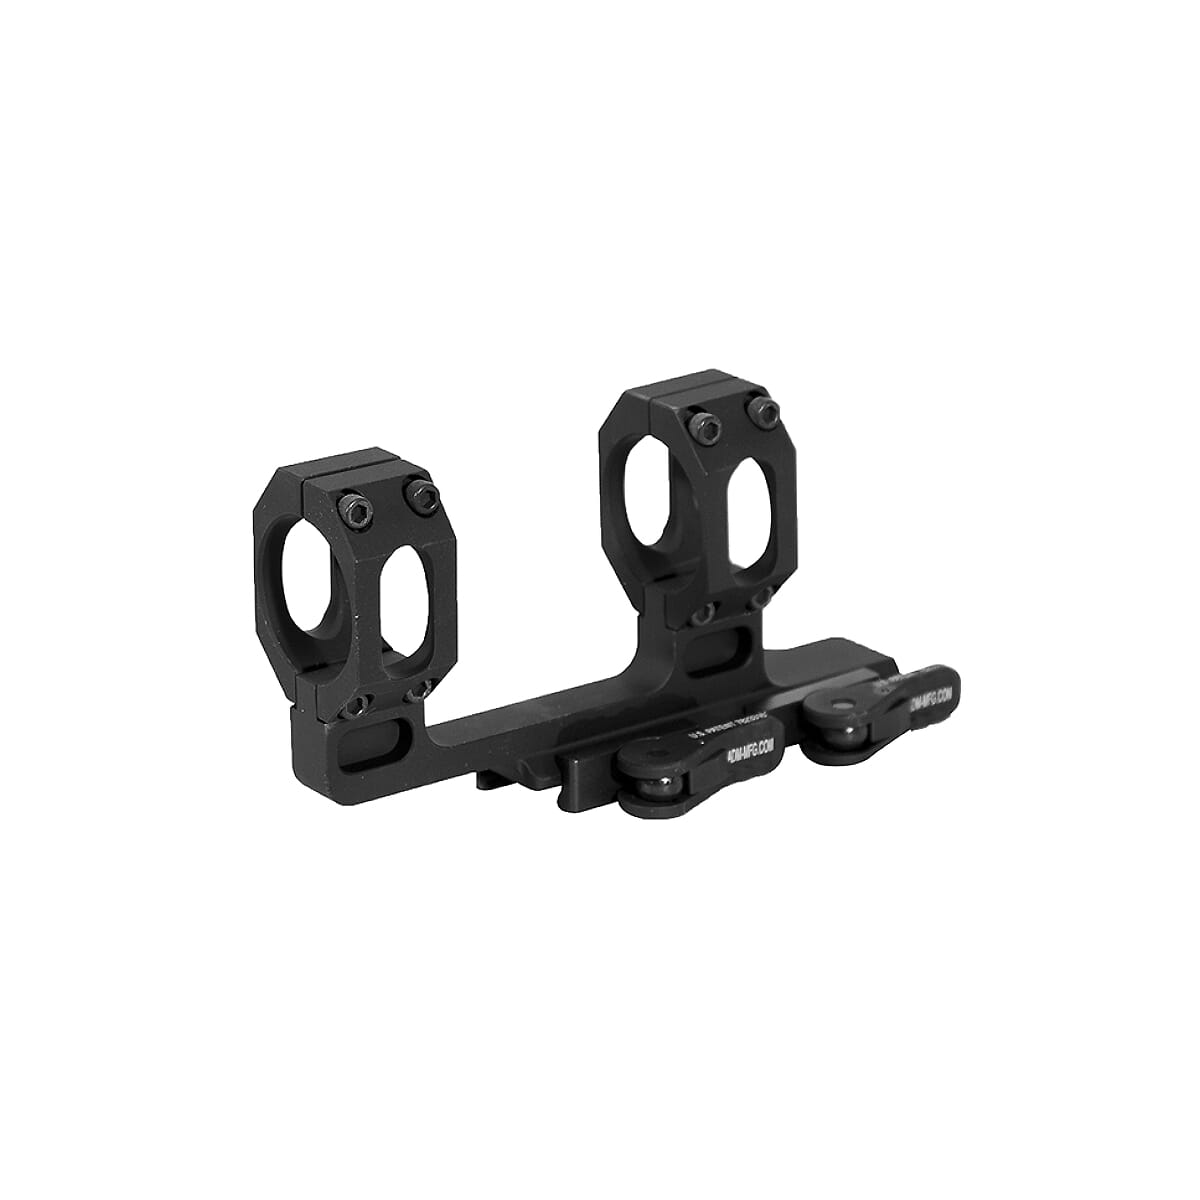 American Defense Manufacturing 34mm Scope Mount AD-RECON-H34STD